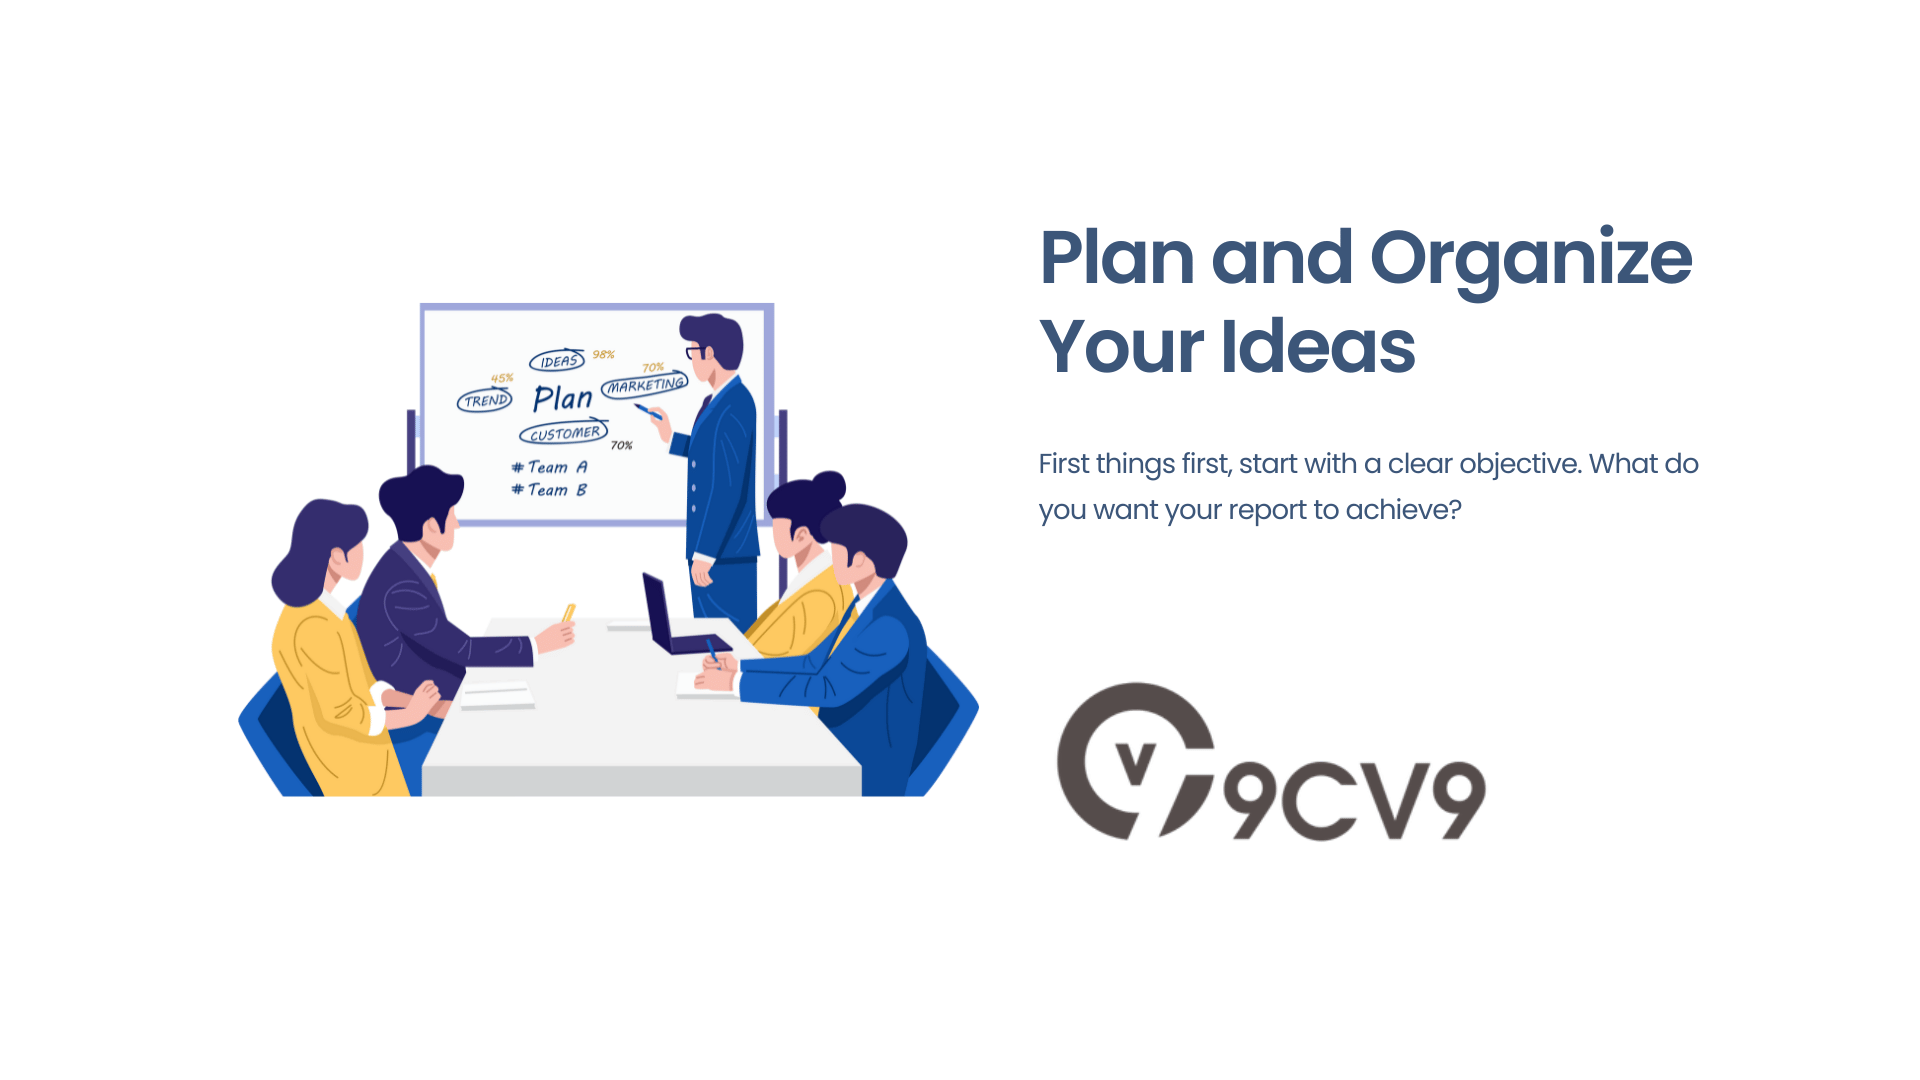 Plan and Organize Your Ideas